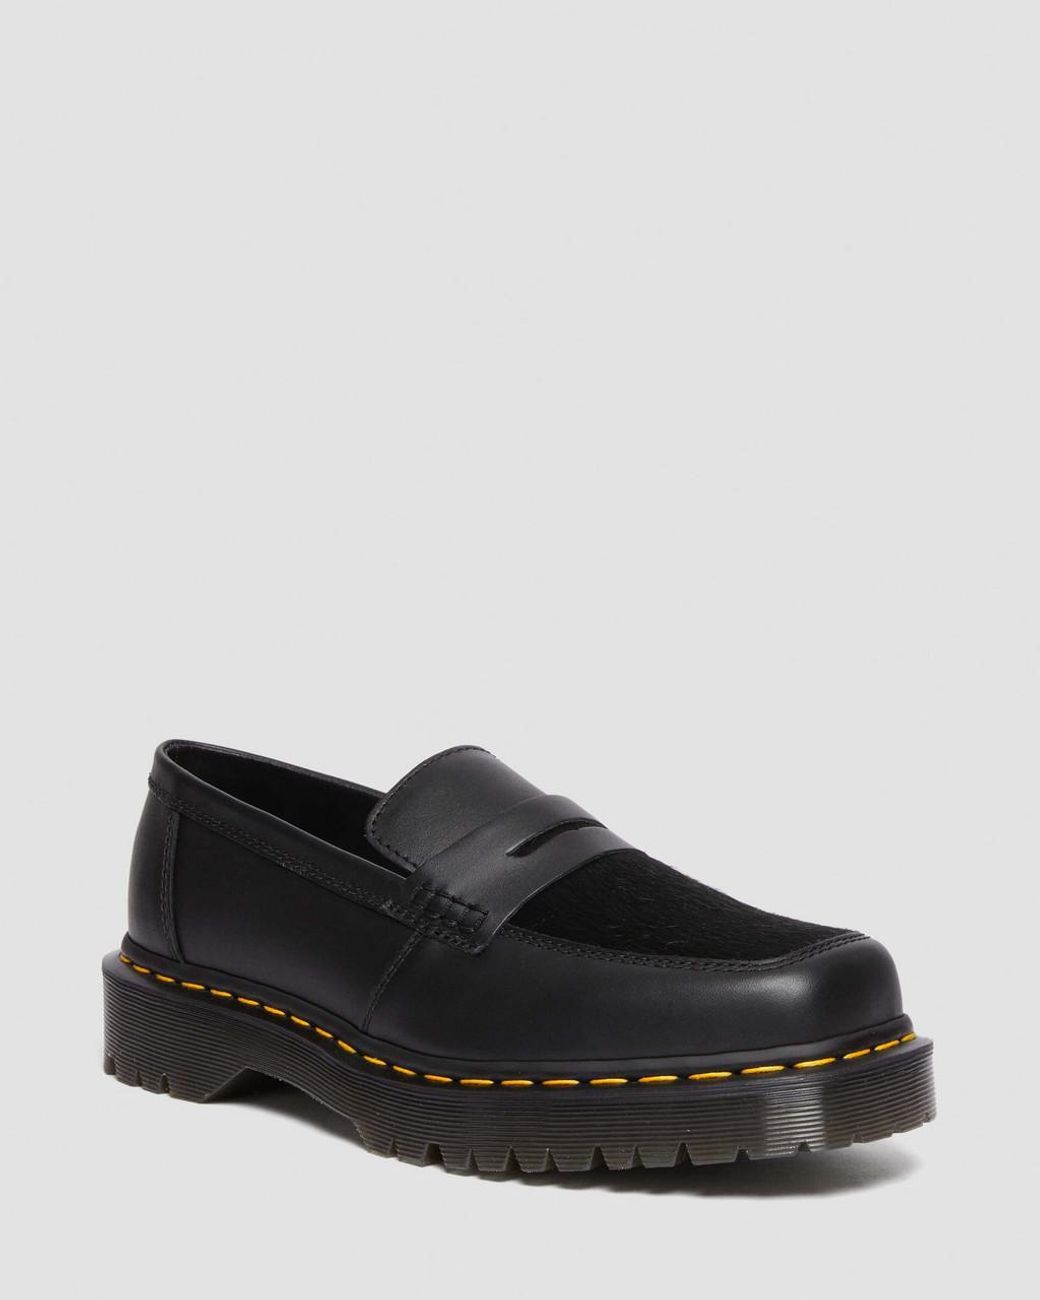 Dr. Martens Penton Bex Square Toe Hair-on & Leather Loafers in Black ...